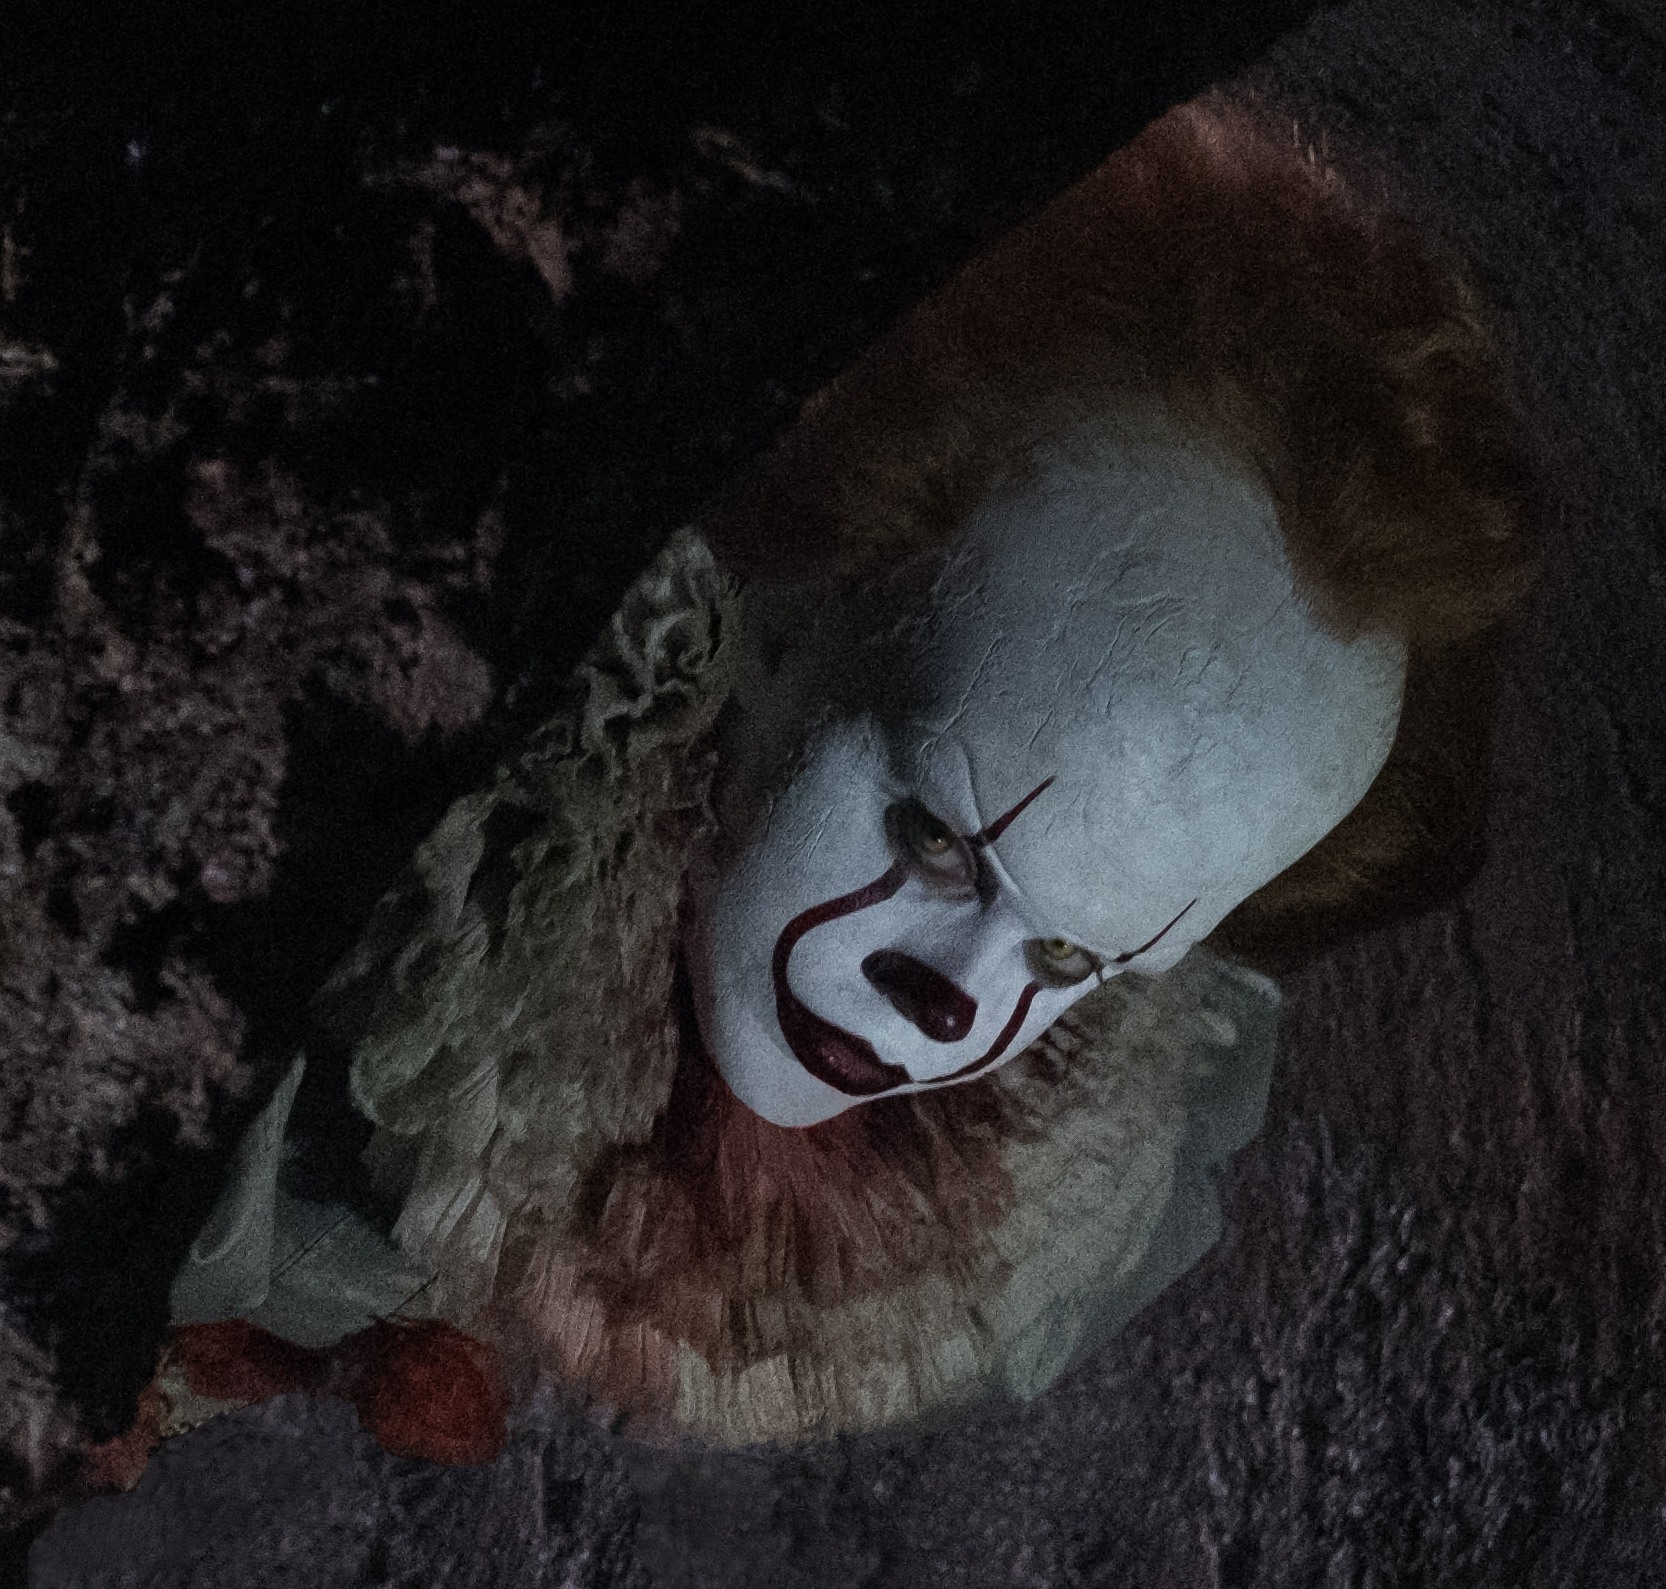 pennwise High-Res Bill Skarsgard Pennywise "It" Image & Synopsis Released